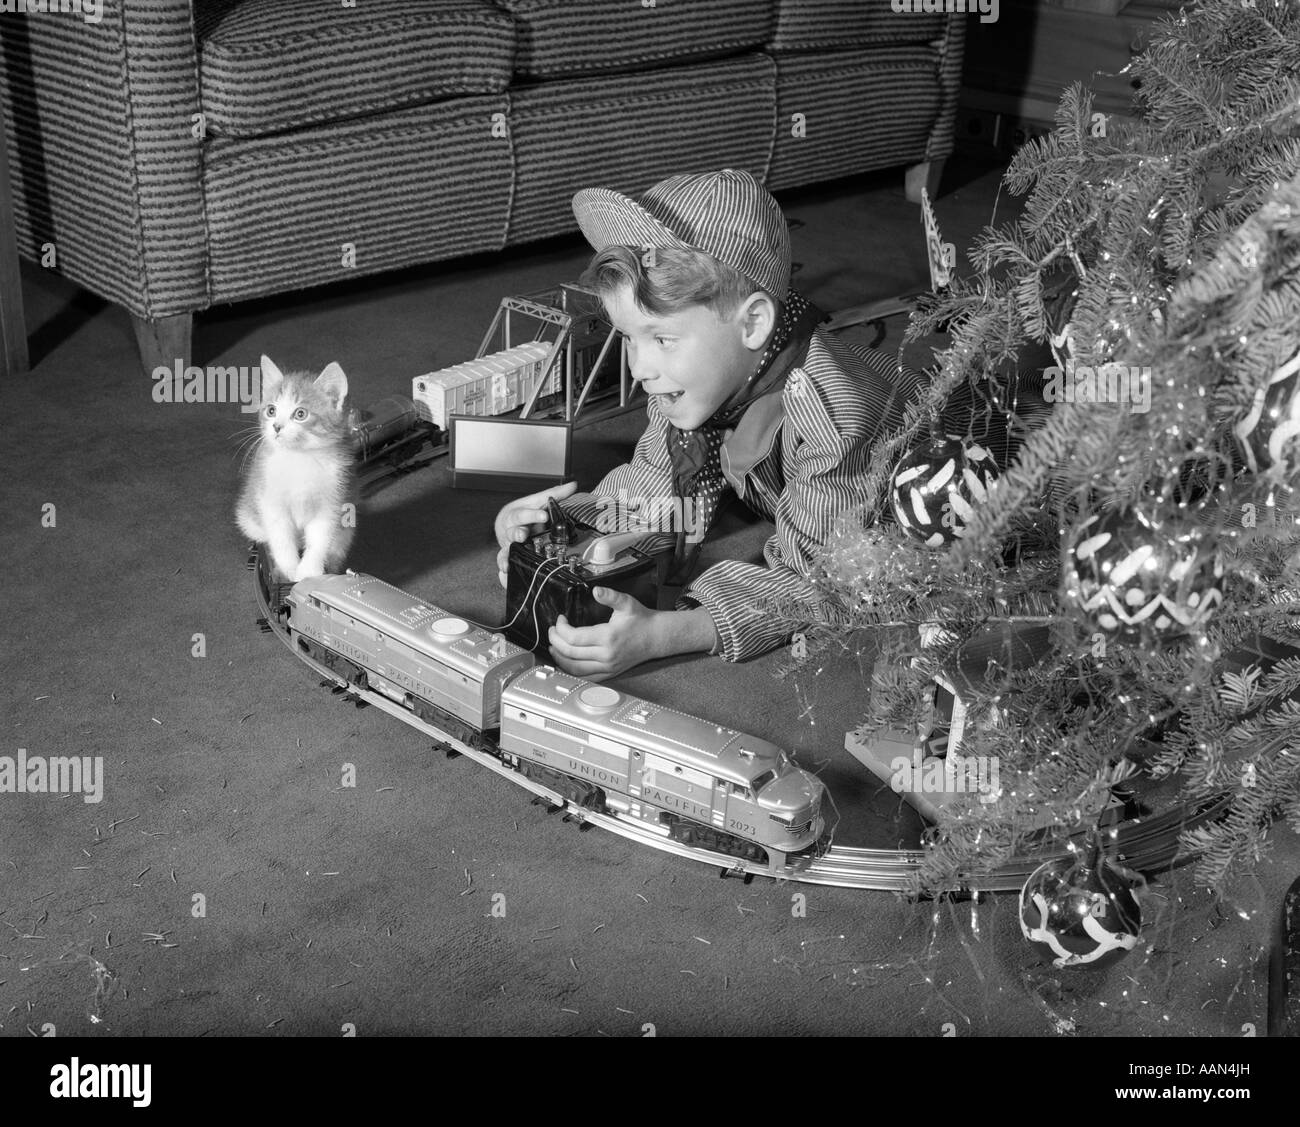 1950s BOY IN ENGINEER OUTFIT PLAYING WITH ELECTRIC TRAIN SET BY CHRISTMAS TREE AND KITTEN INDOOR Stock Photo